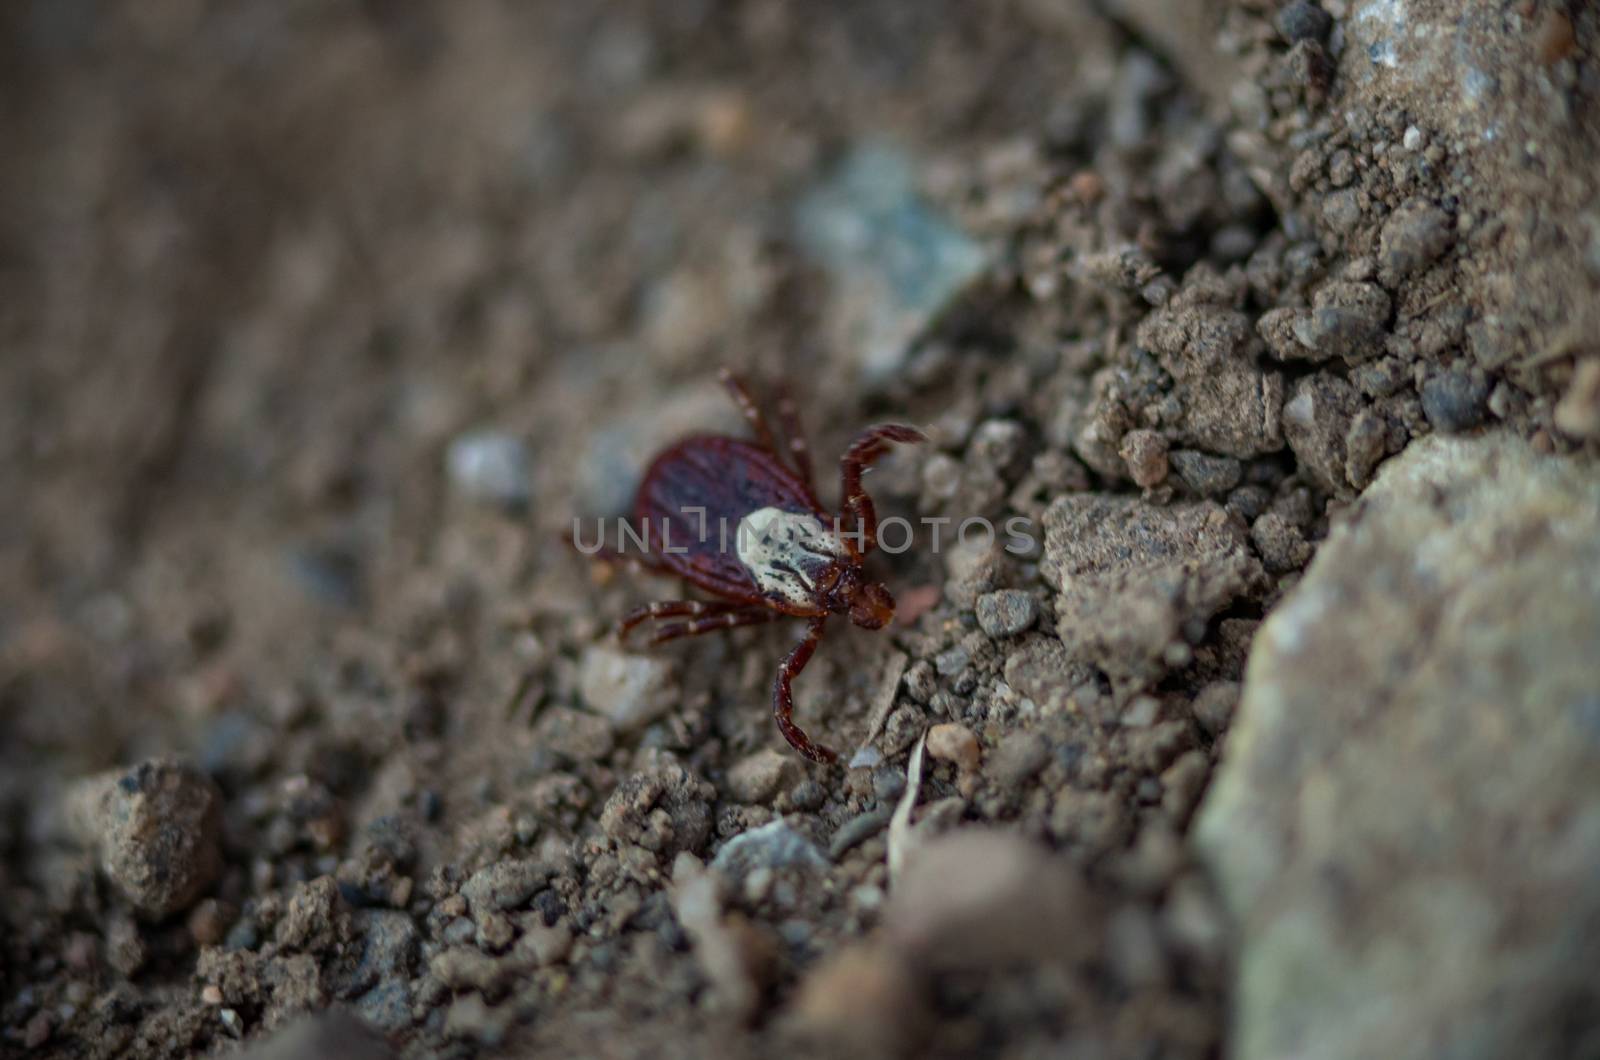 American dog tick or wood tick, dermacentor variabilis, crawling on the ground over gravel